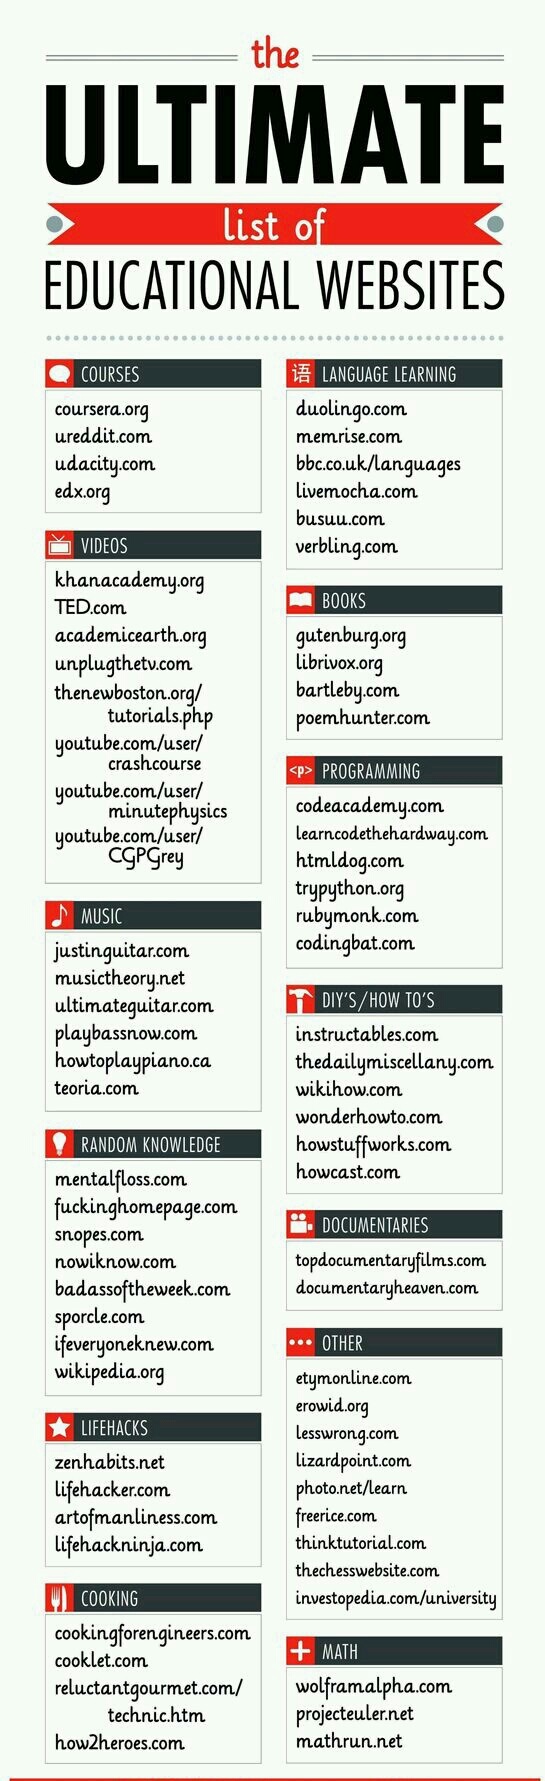 The ultimate list of educational websites